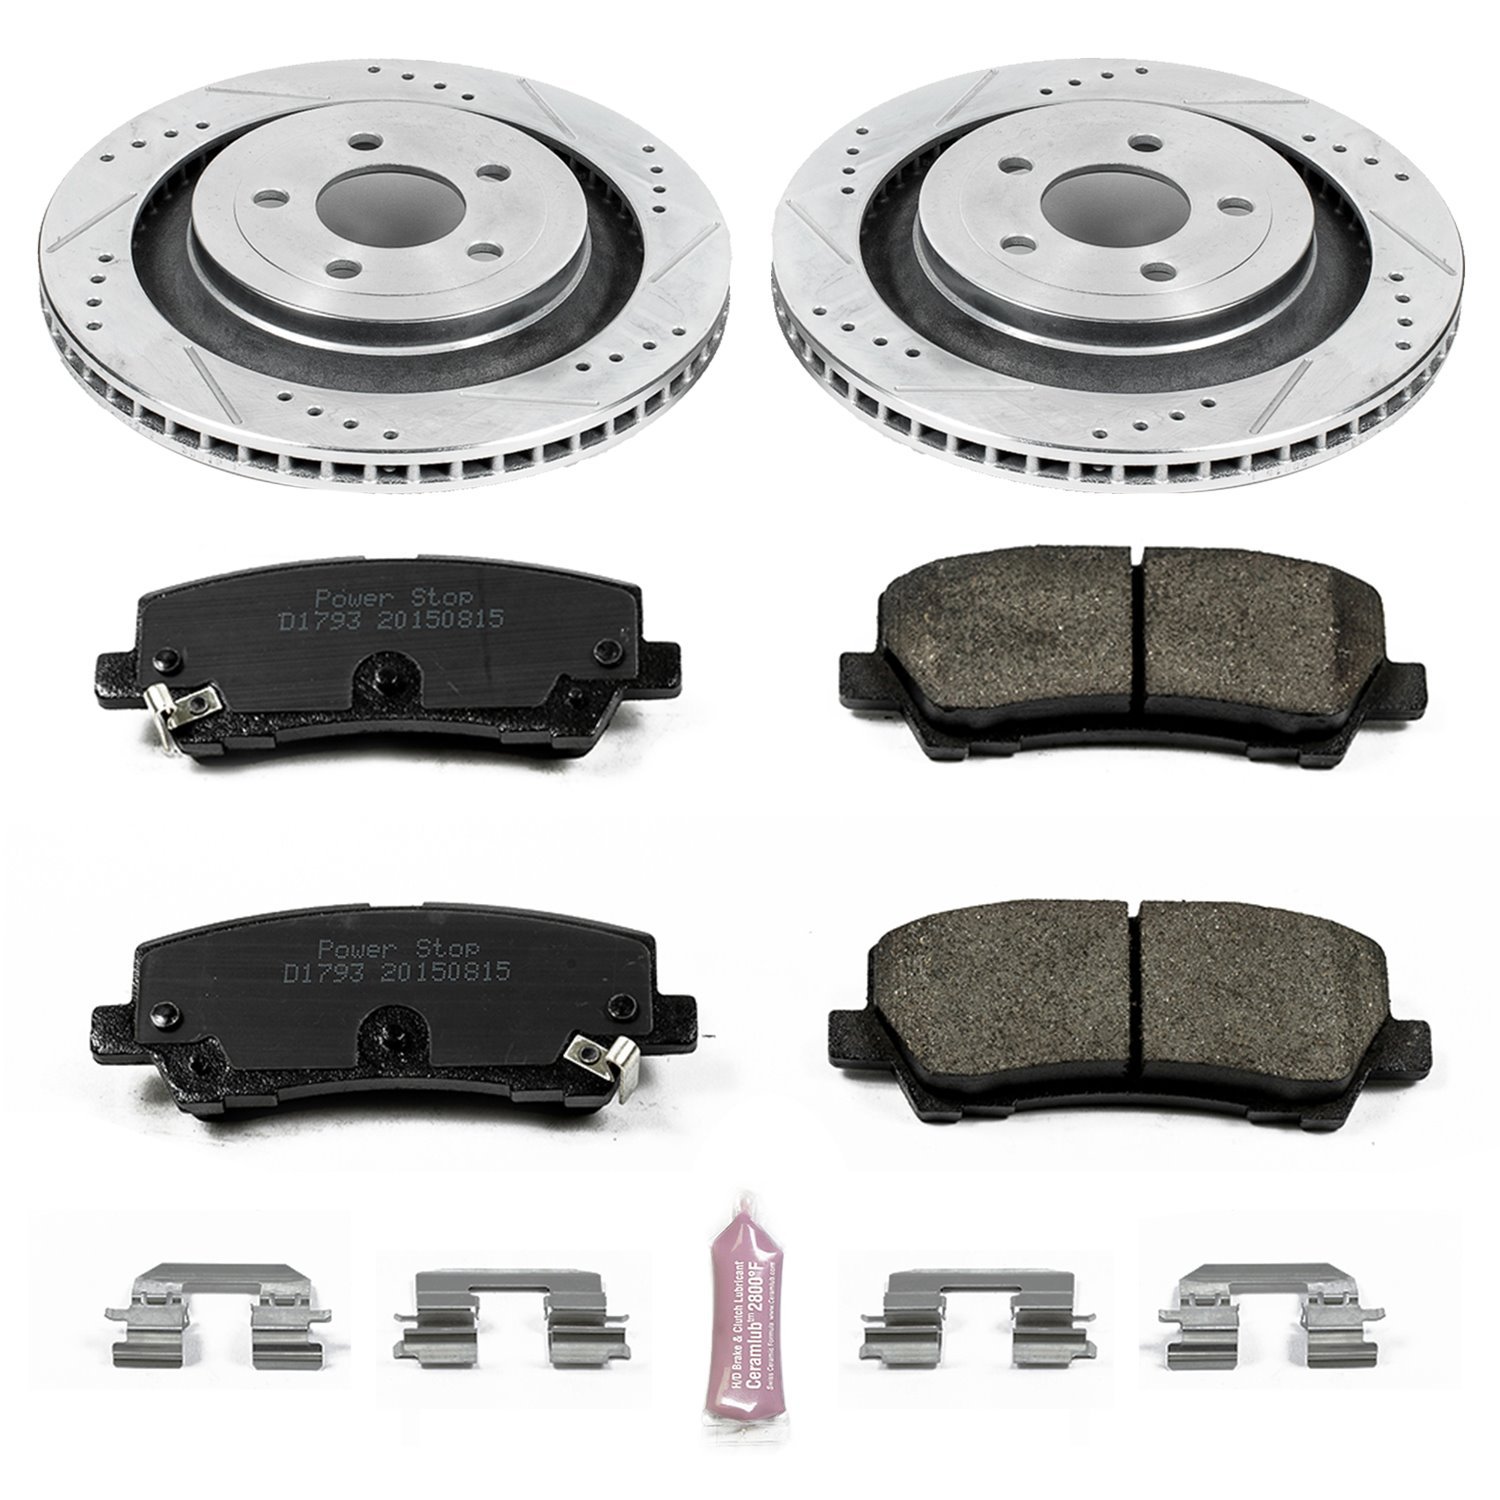 Z23 Rear Brake Pads & Rotor Kit for 2015-2018 Ford Mustang EcoBoost and GT